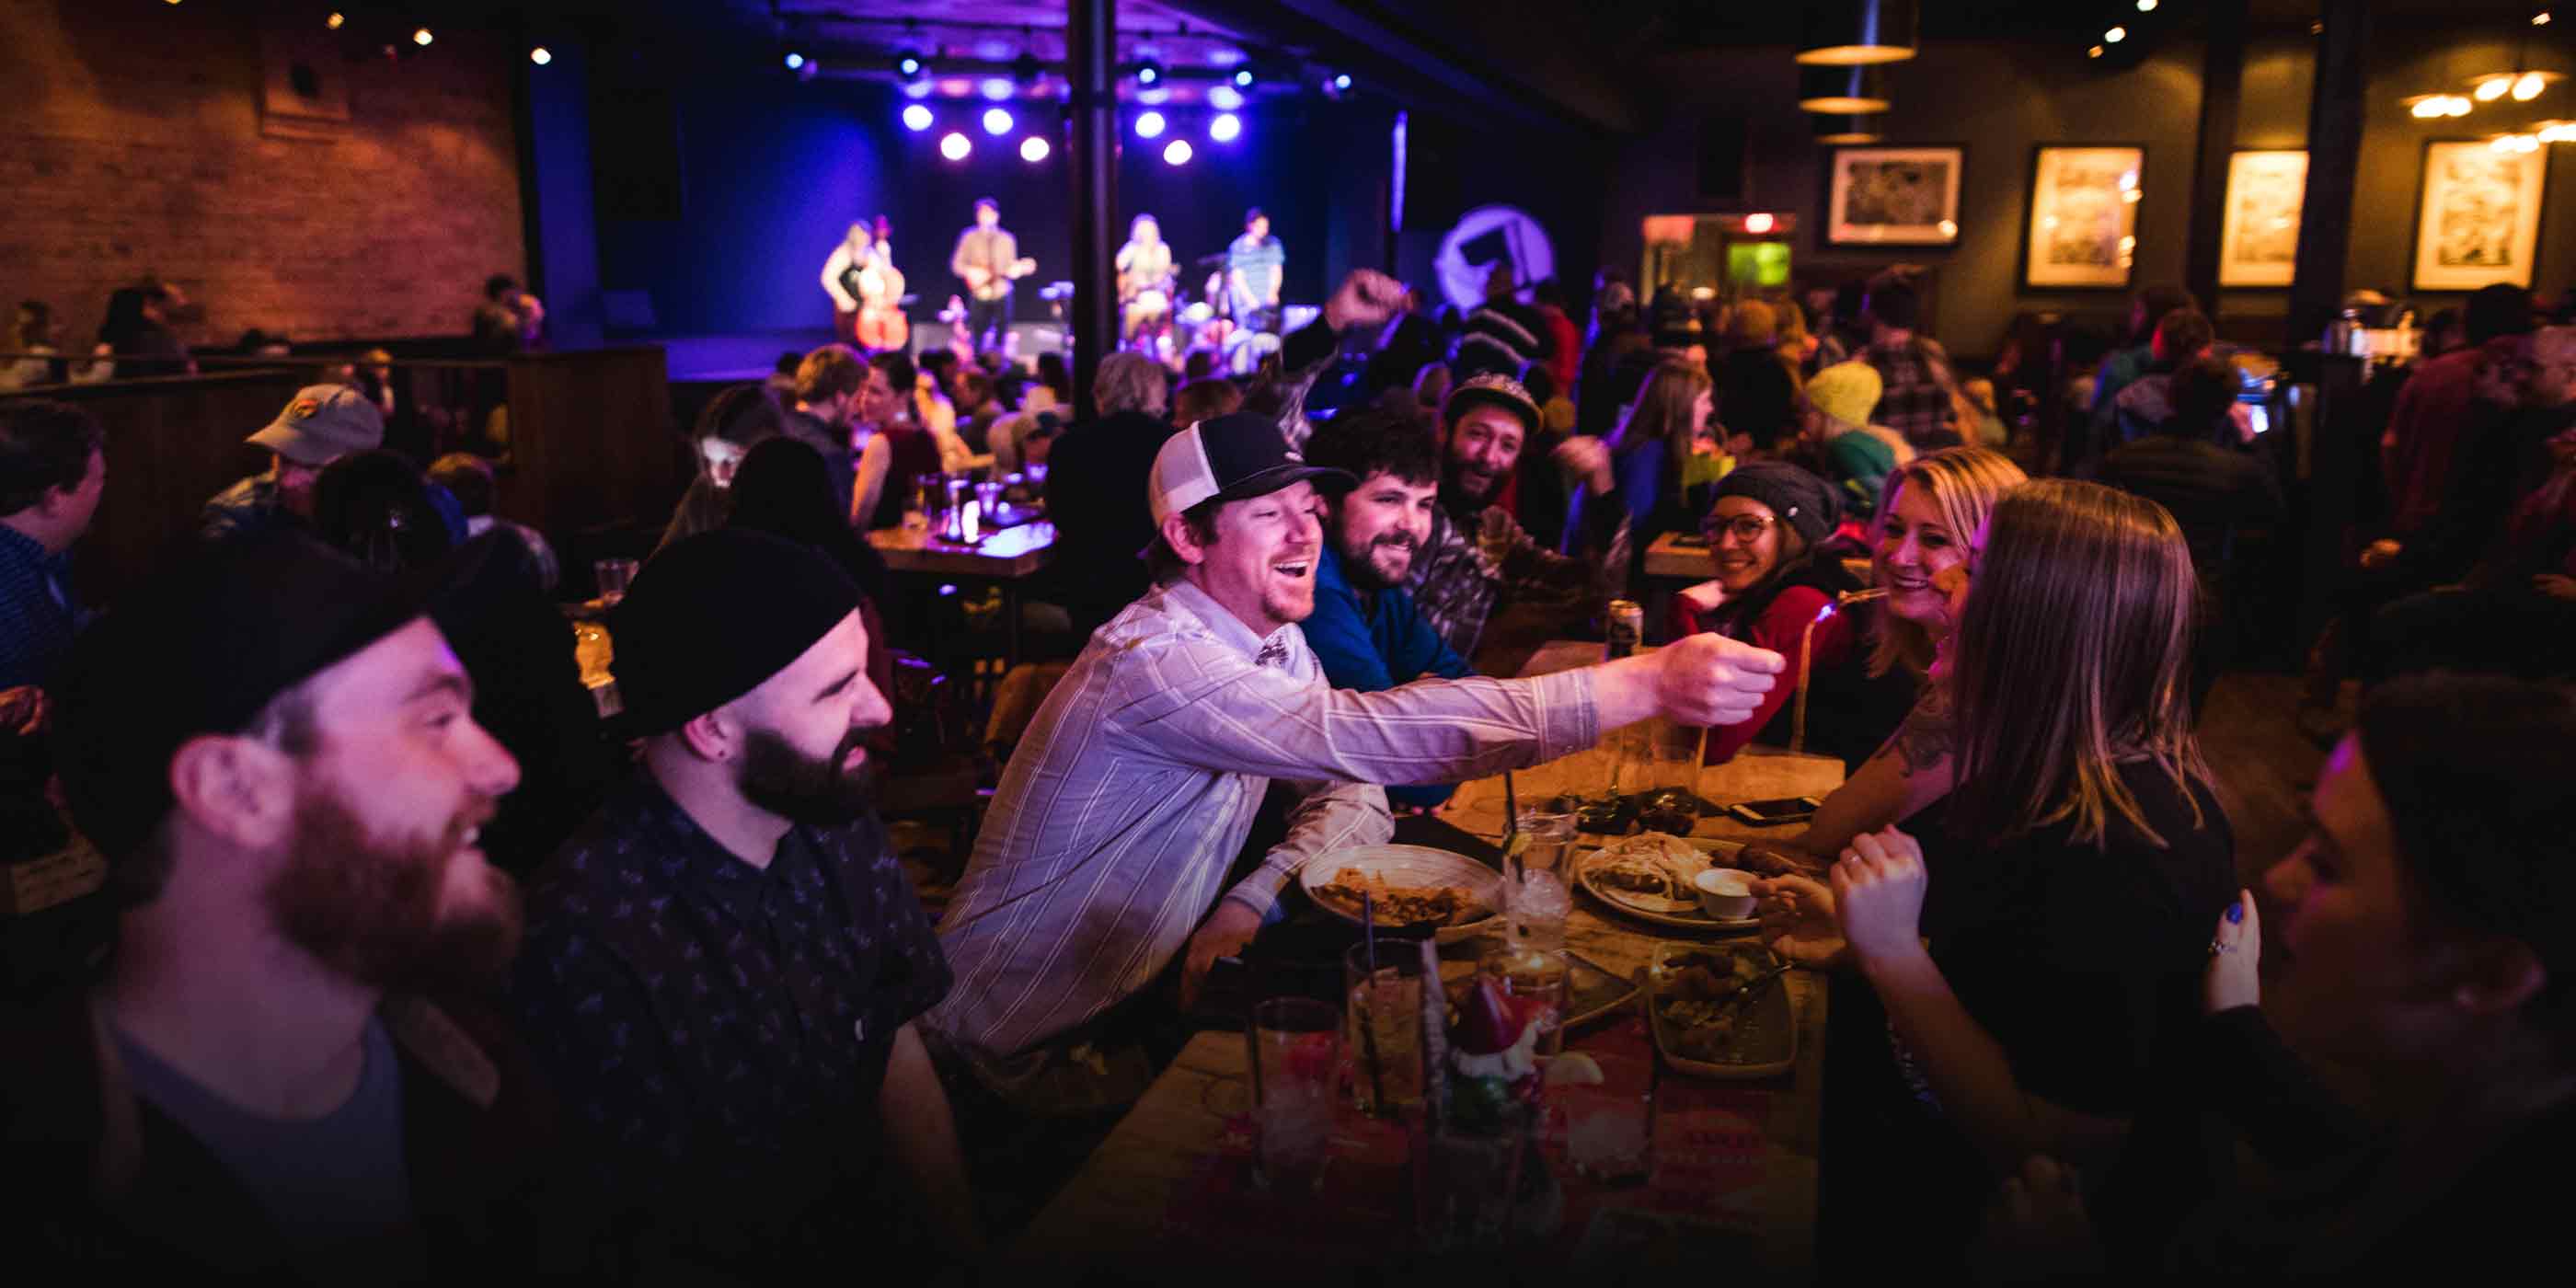 Tunes and Taste is the Top Hat's music infused dinner theme nights